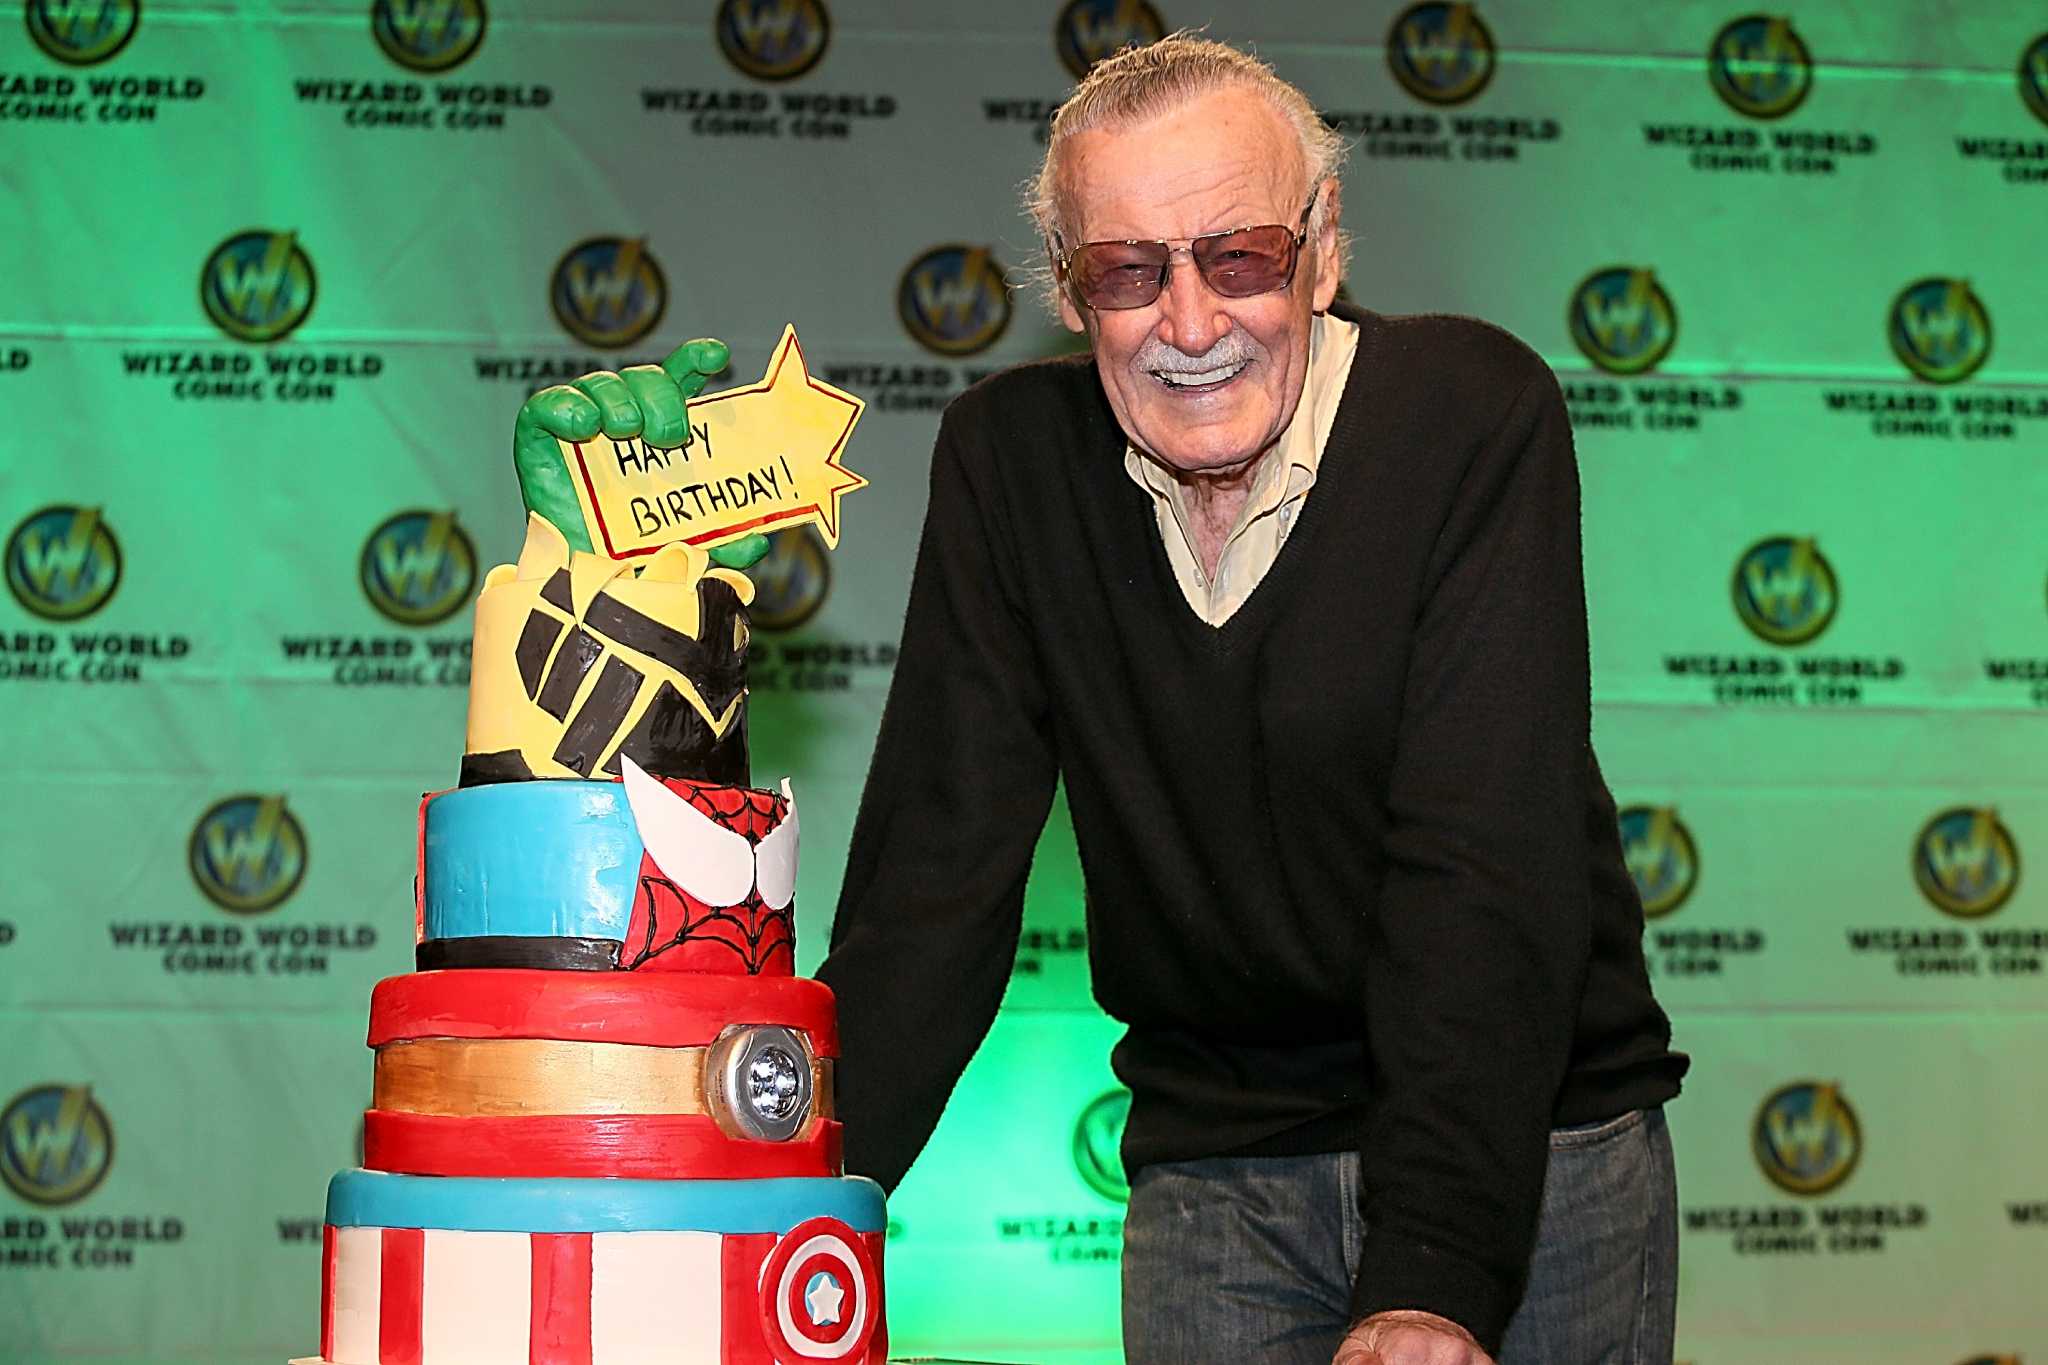 Stan Lee to appear at Comicpalooza